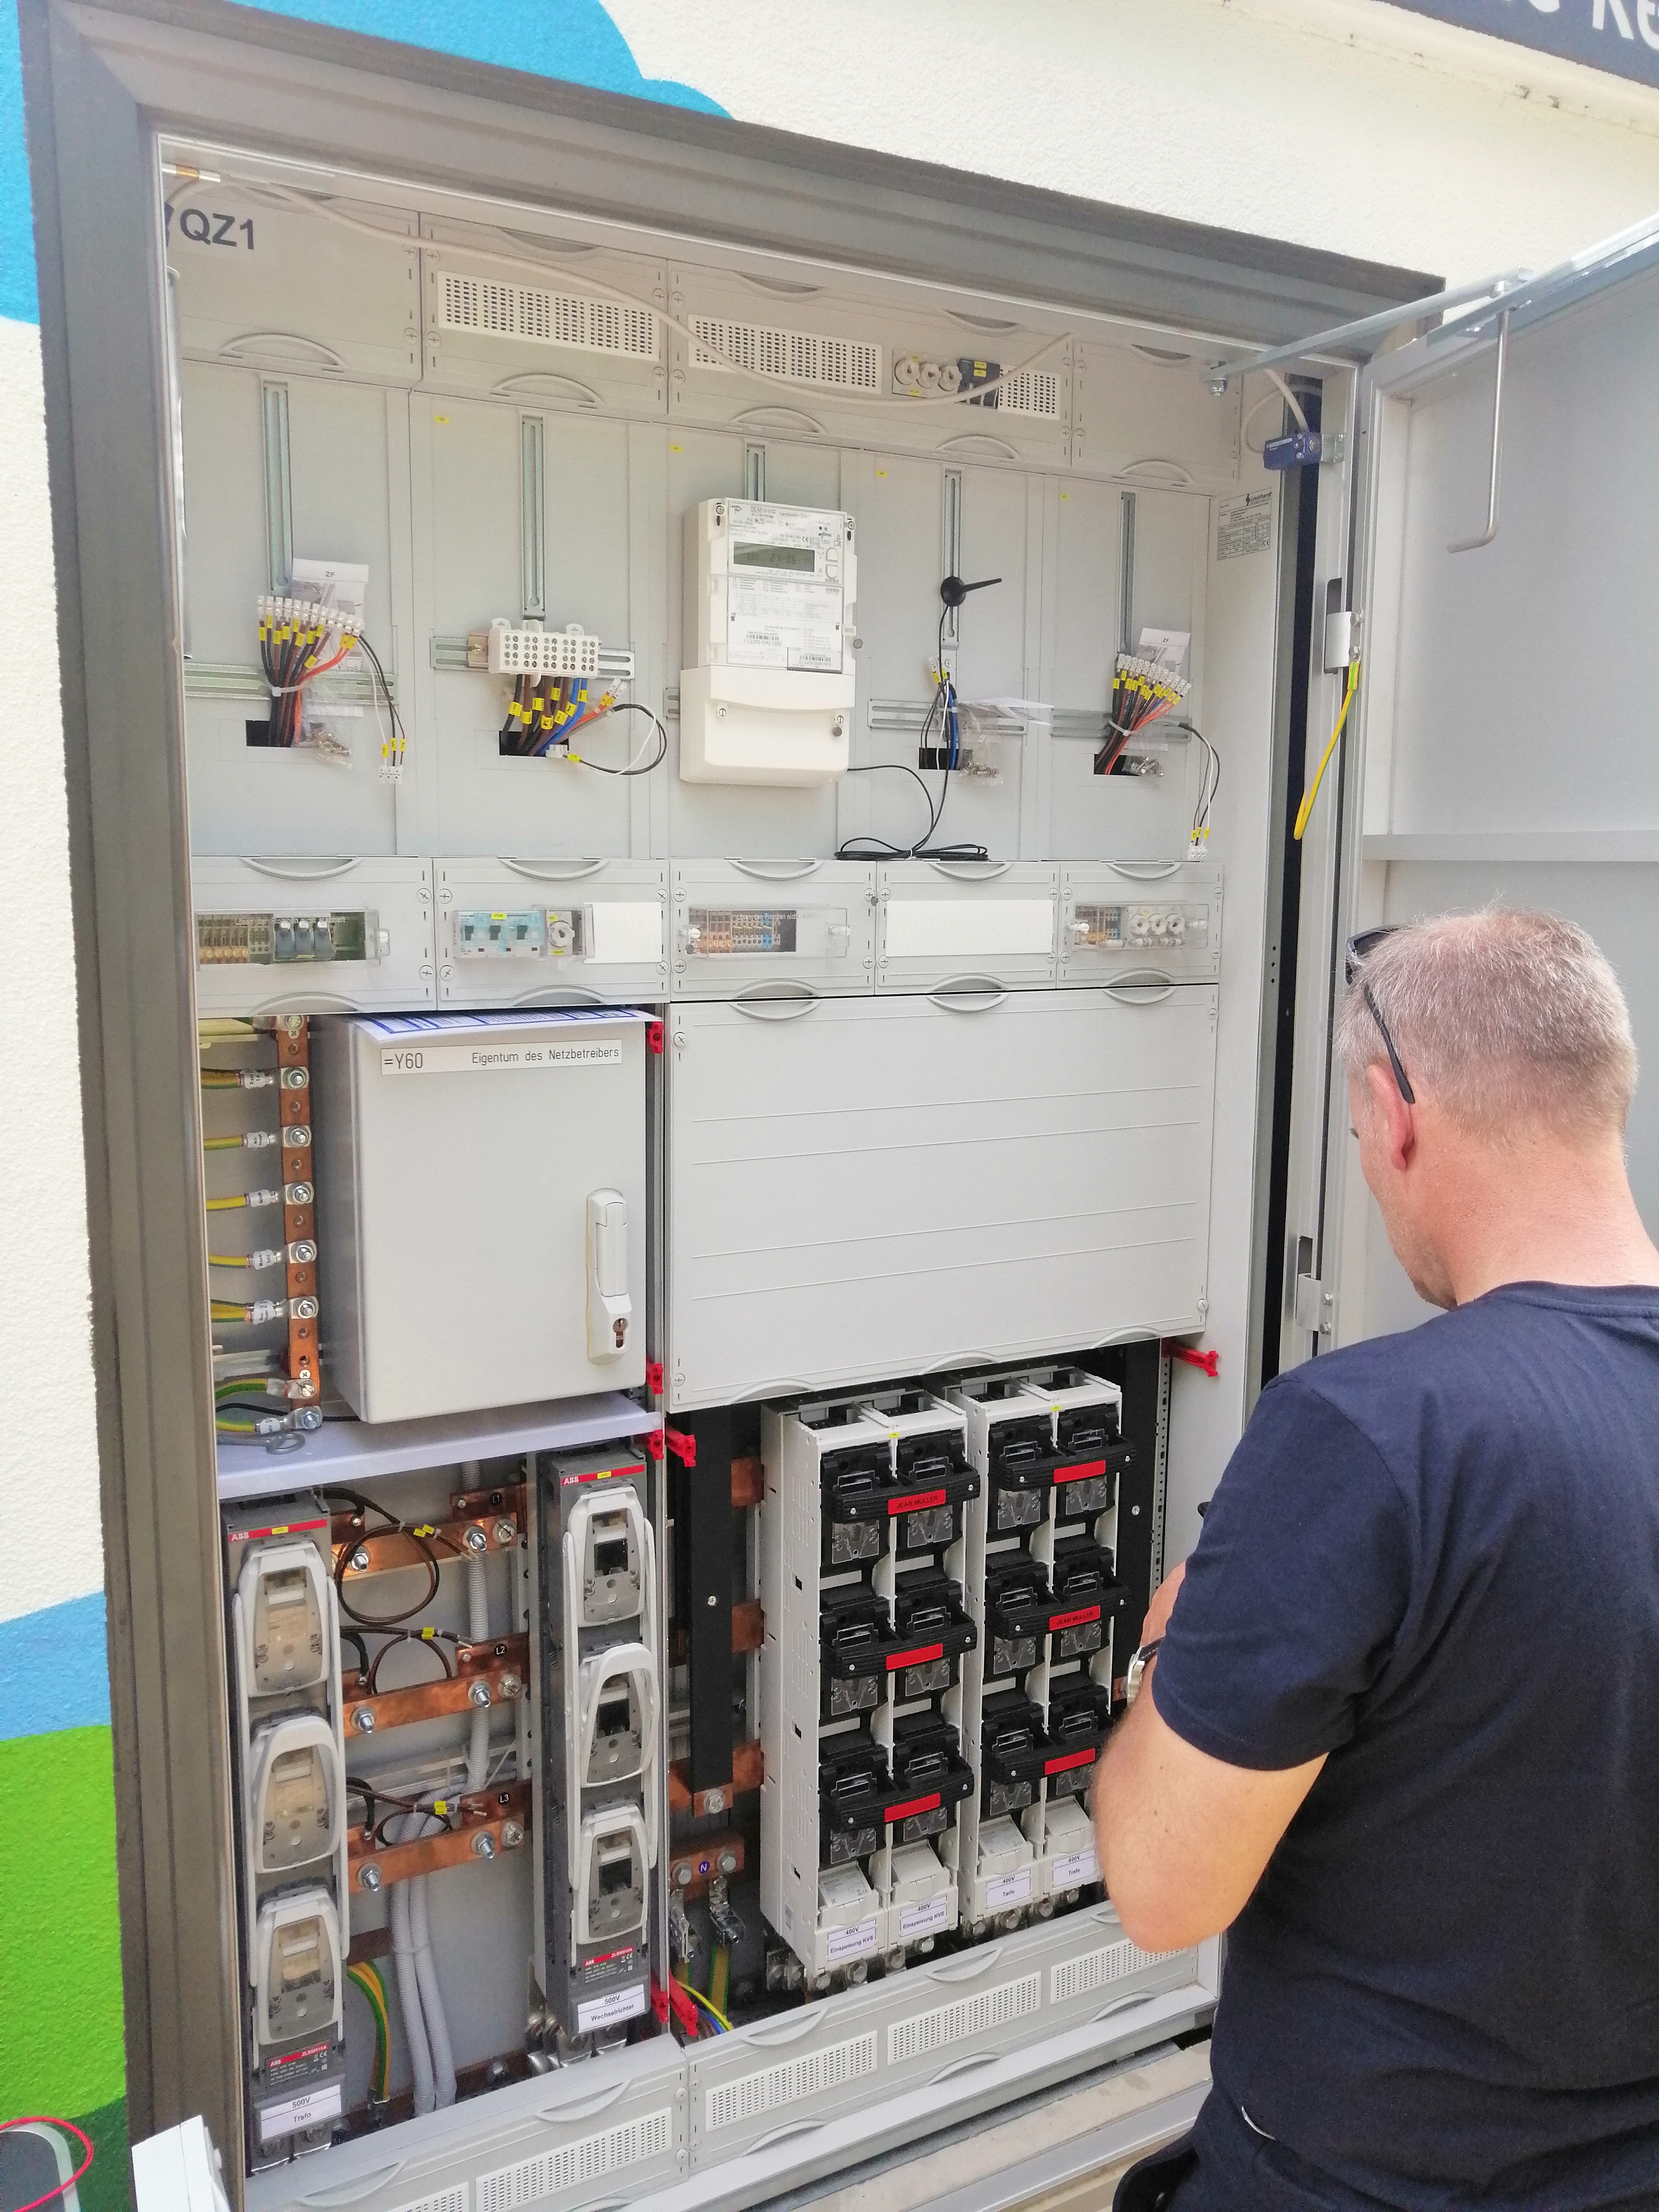 Low-voltage switchgear for measuring loadsand feed-in in low and middle voltage grid